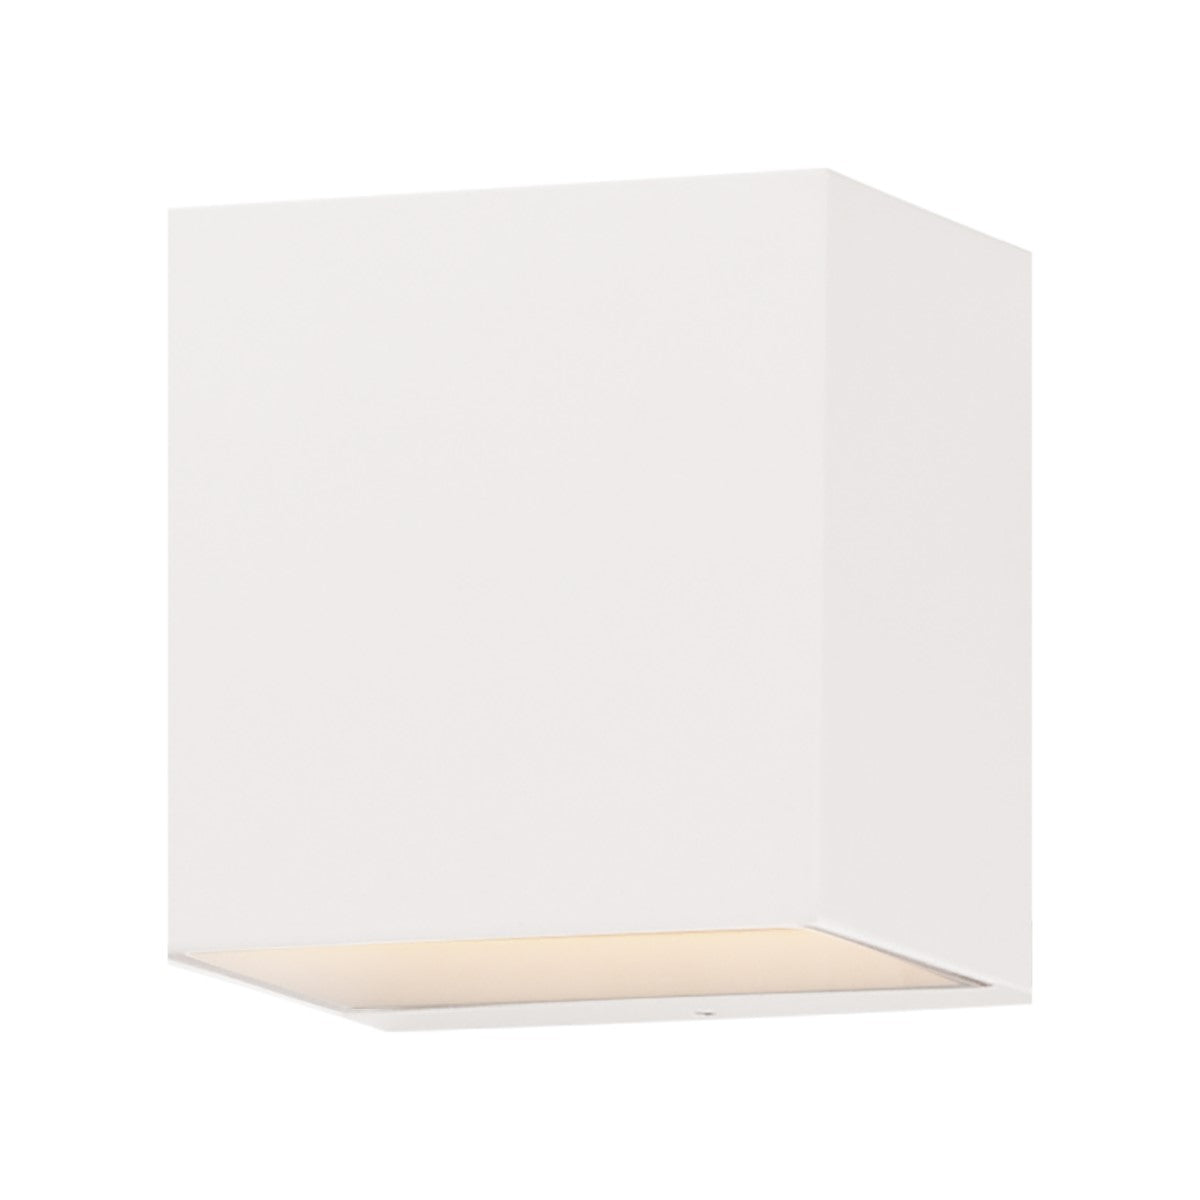 Blok 5 in. LED Outdoor Wall Sconce 3000K - Bees Lighting